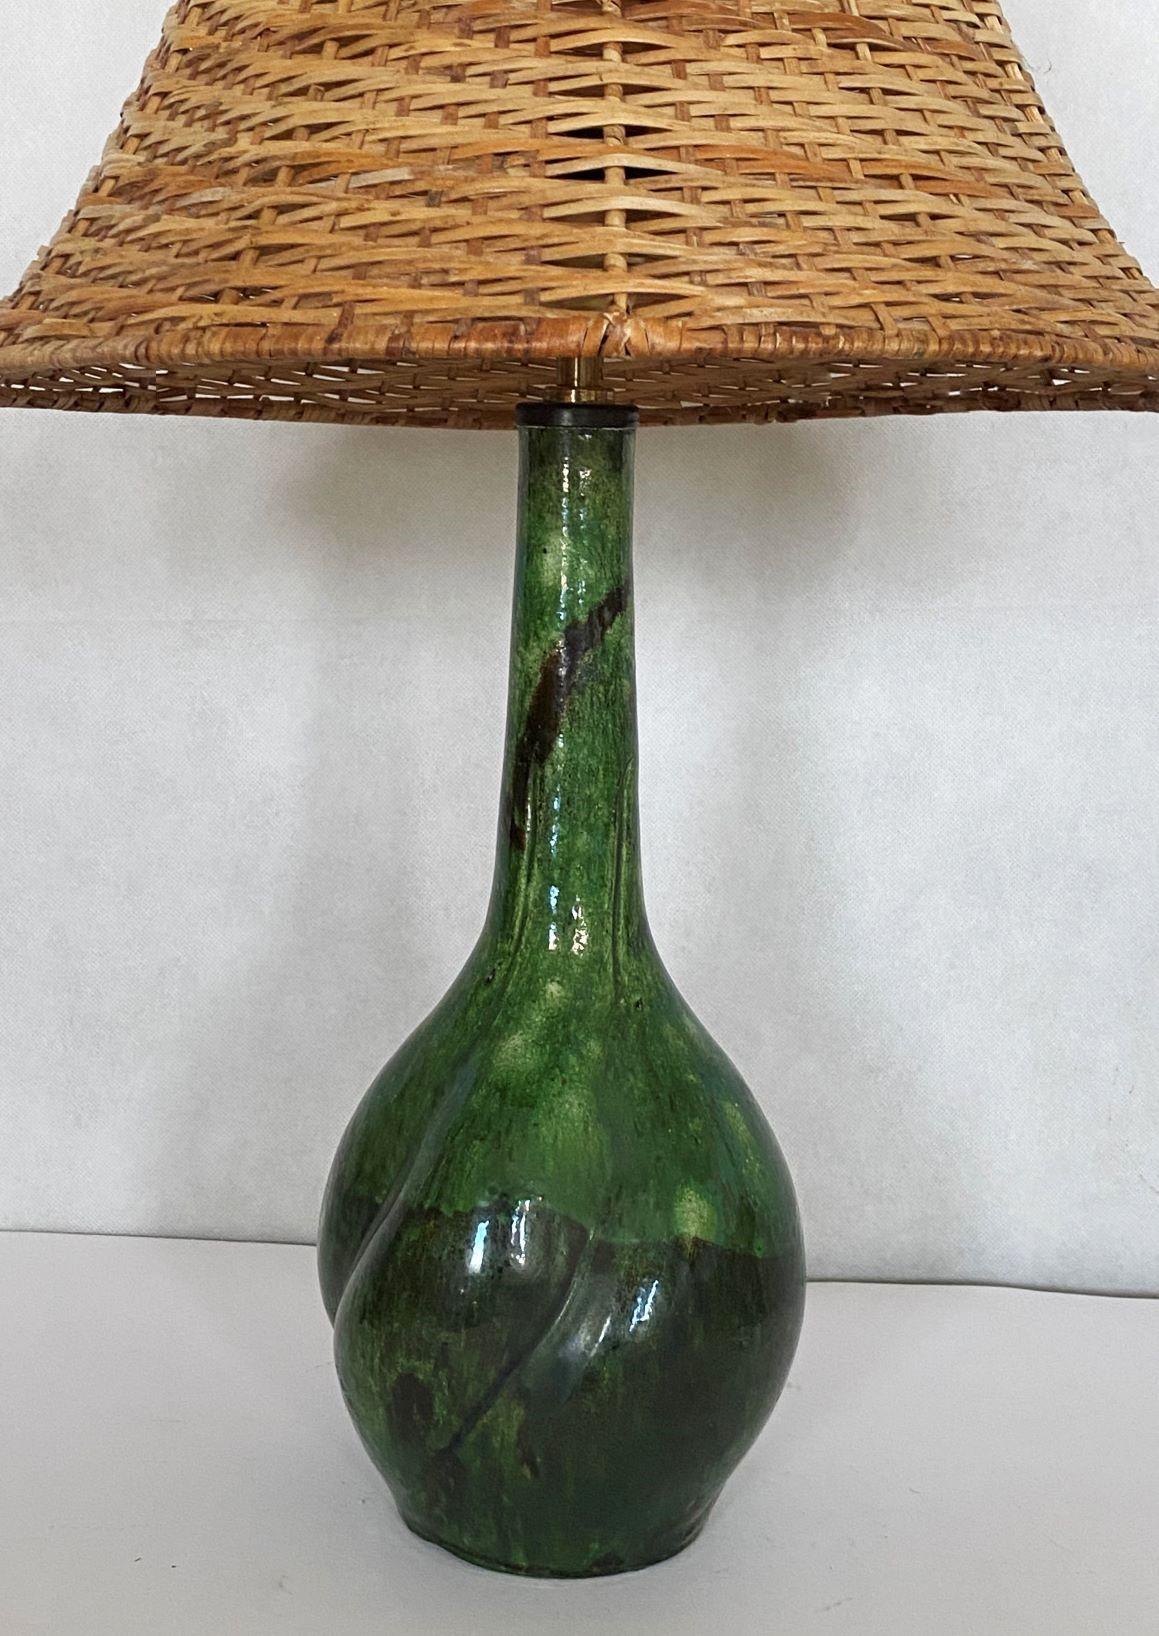 20th Century Danish Hand-Painted Glased Ceramic Table Lamp with Wicker Shade, 1960s For Sale